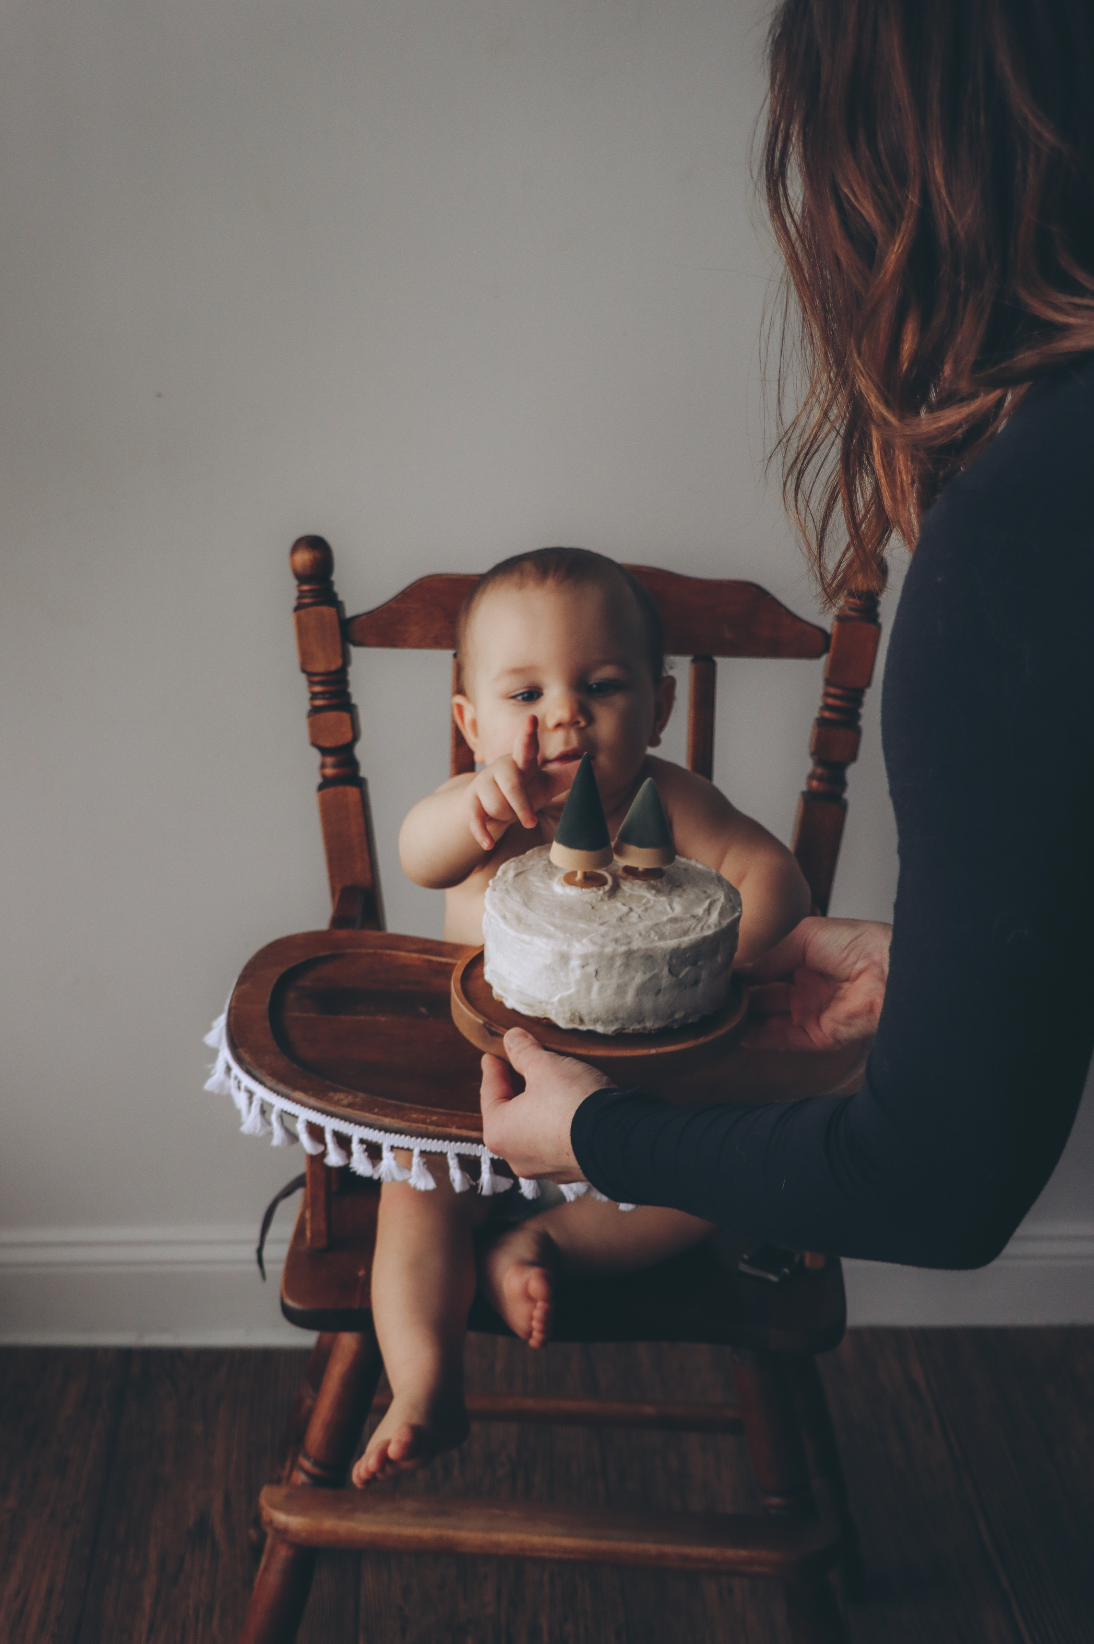 A happy baby being presented with a cake